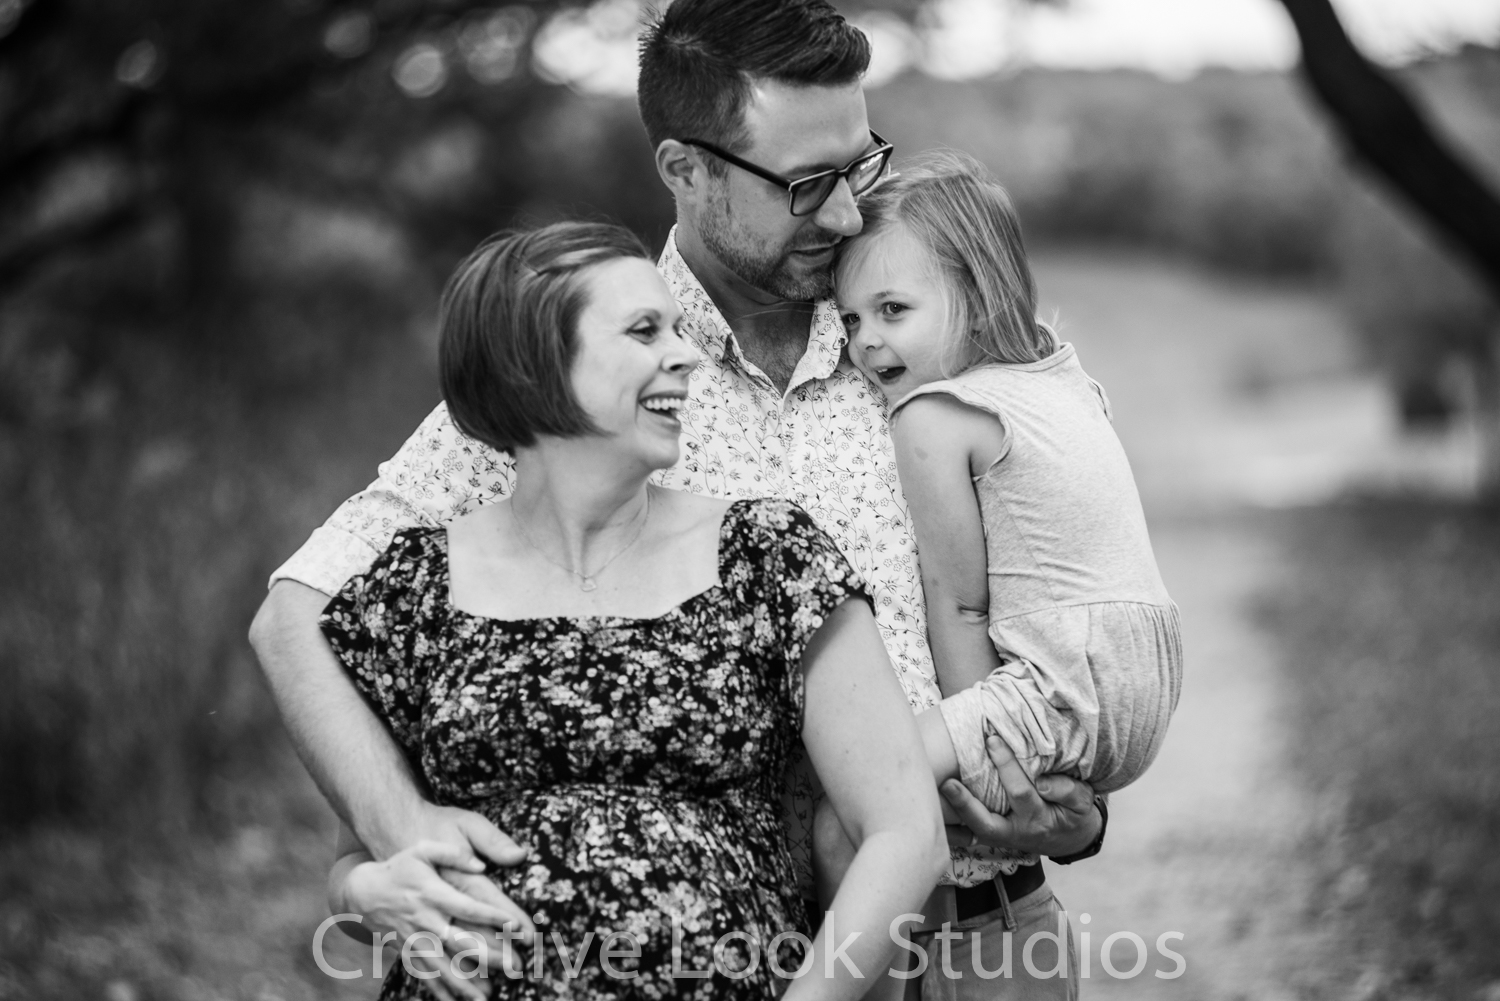 Maternity and Family Portrait Photographer